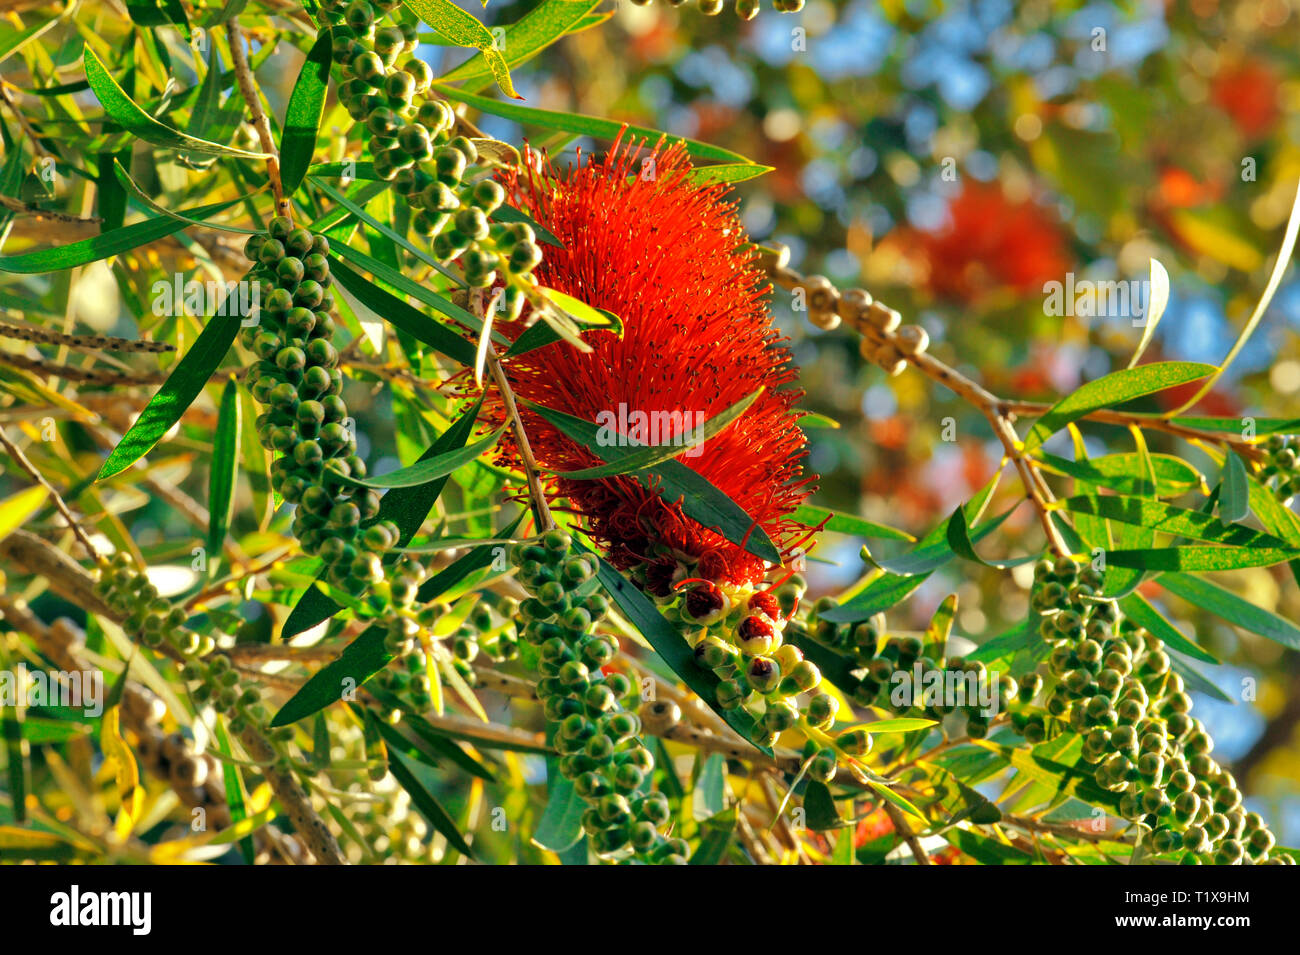 Australian Bottle Brush, or Callistemon. A genus of shrubs in the family Myrtaceae, native to Australia. The red and green contrast with the blue sky. Stock Photo